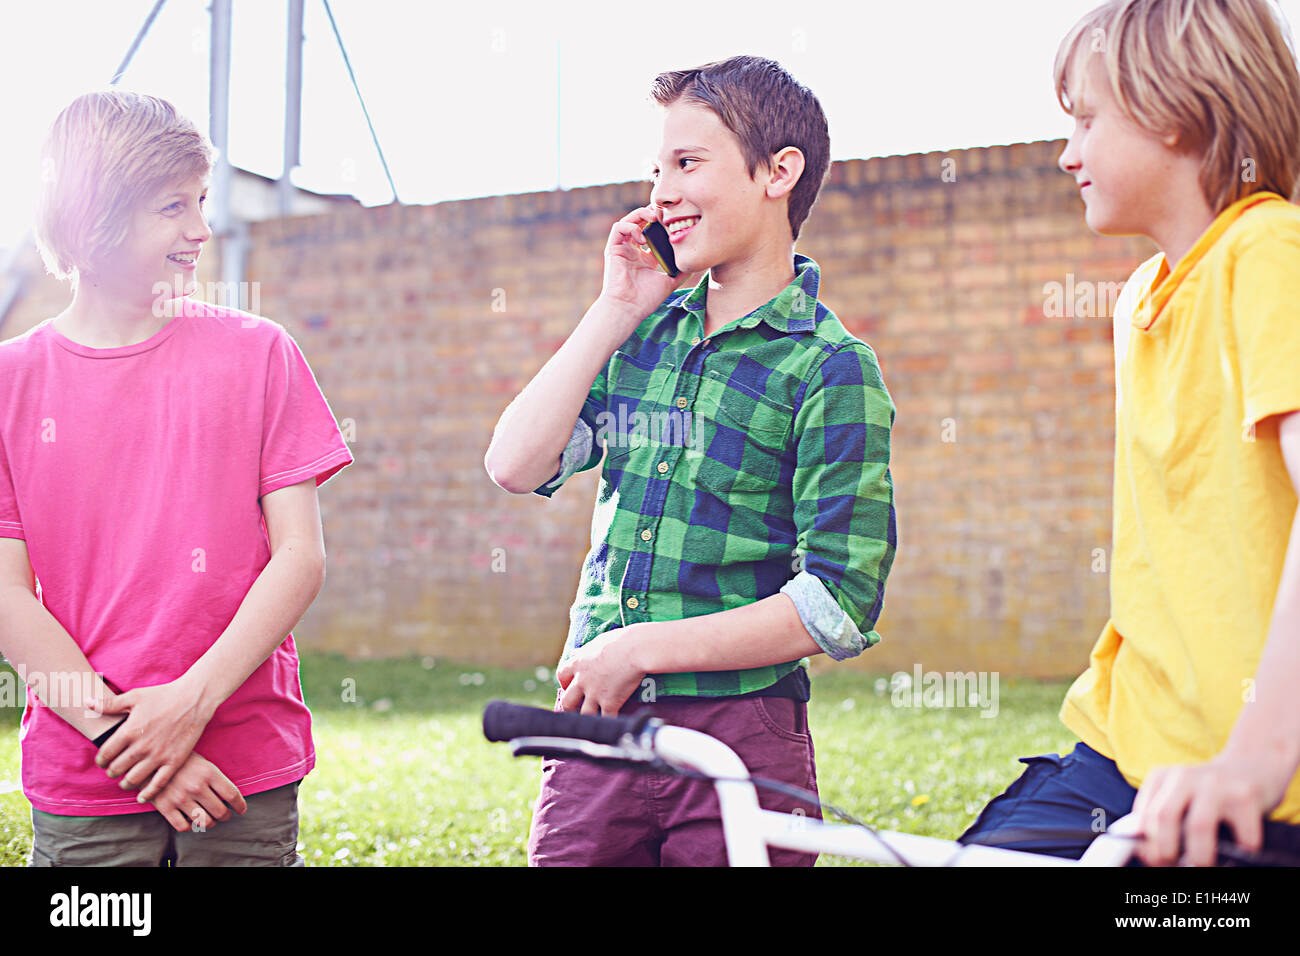 Boy using cell phone with two friends Stock Photo